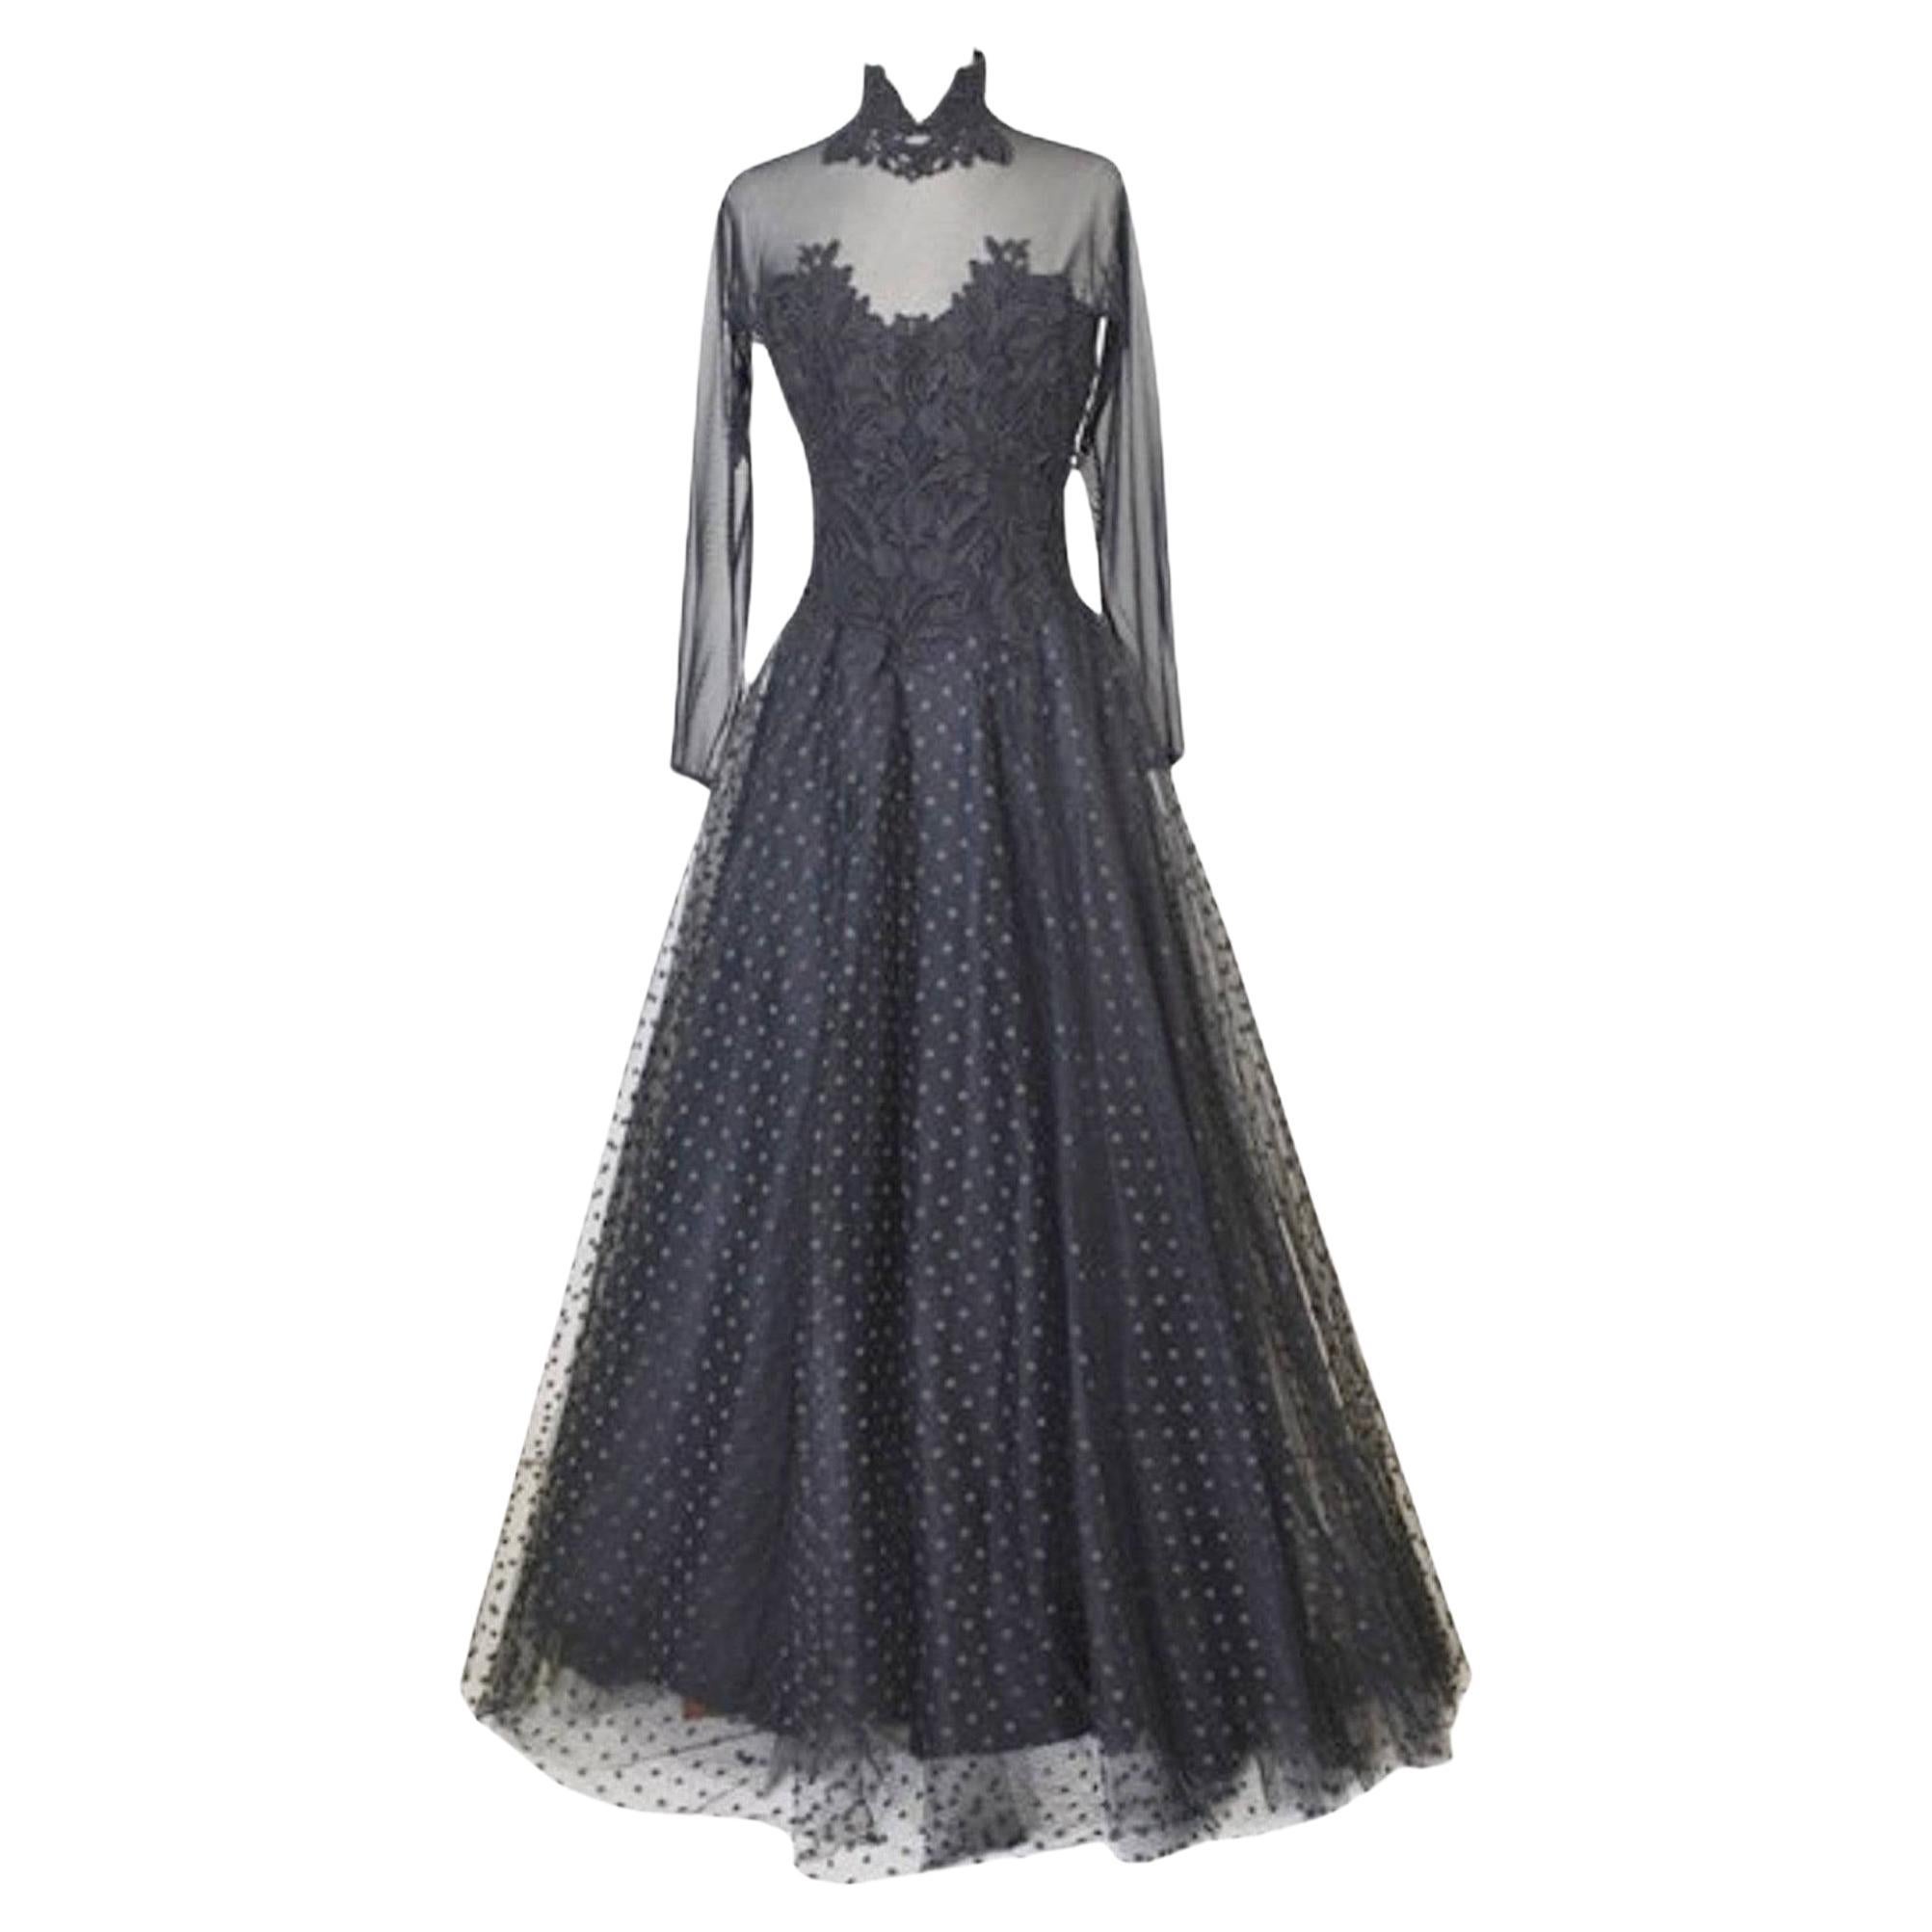 Lillie Rubin Sheer Black Polka Dot and Lace Soft Tulle Gothic Evening Gown SM For Sale